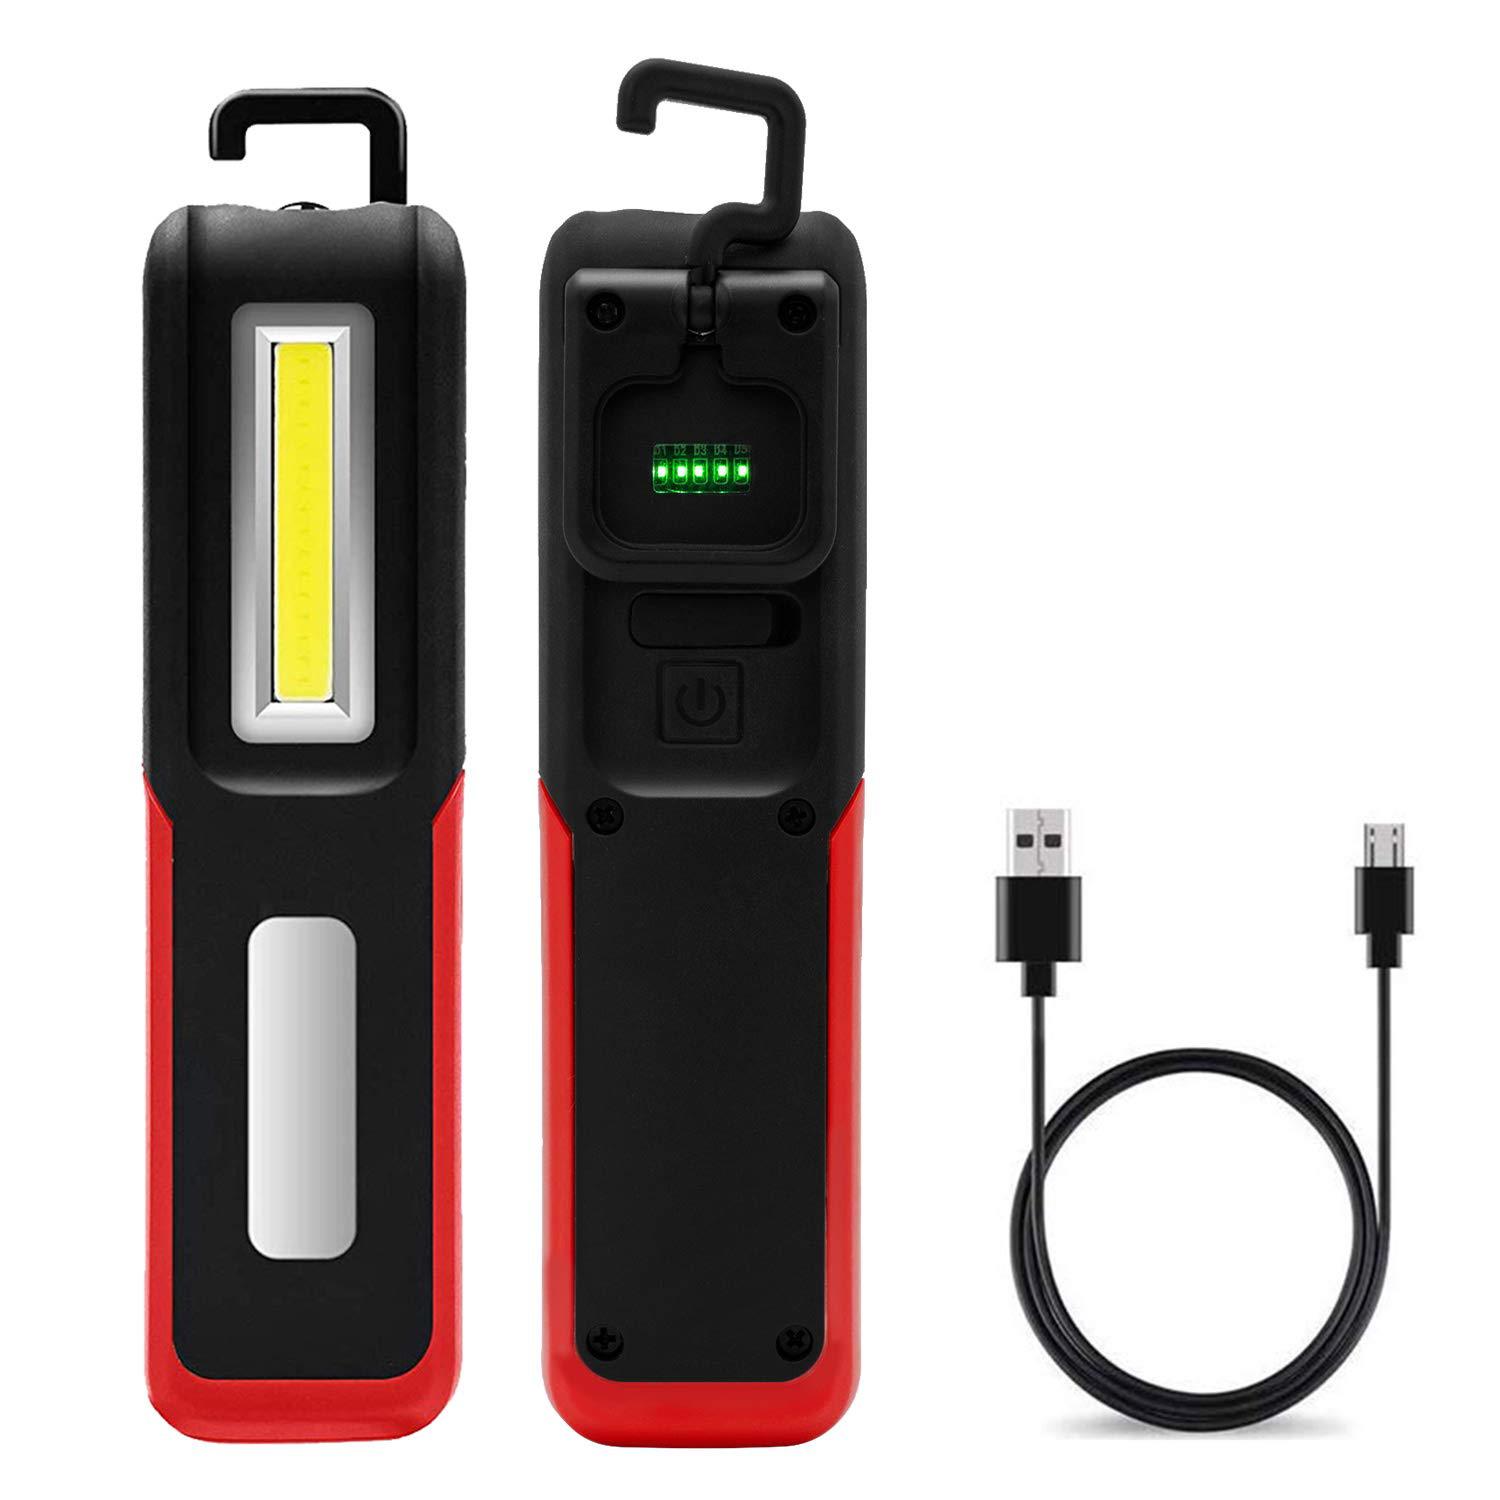 SHINROW cob led magnetic work light with usb rechargeable,portable task inspection trouble lights lamp is small and reliable and supe